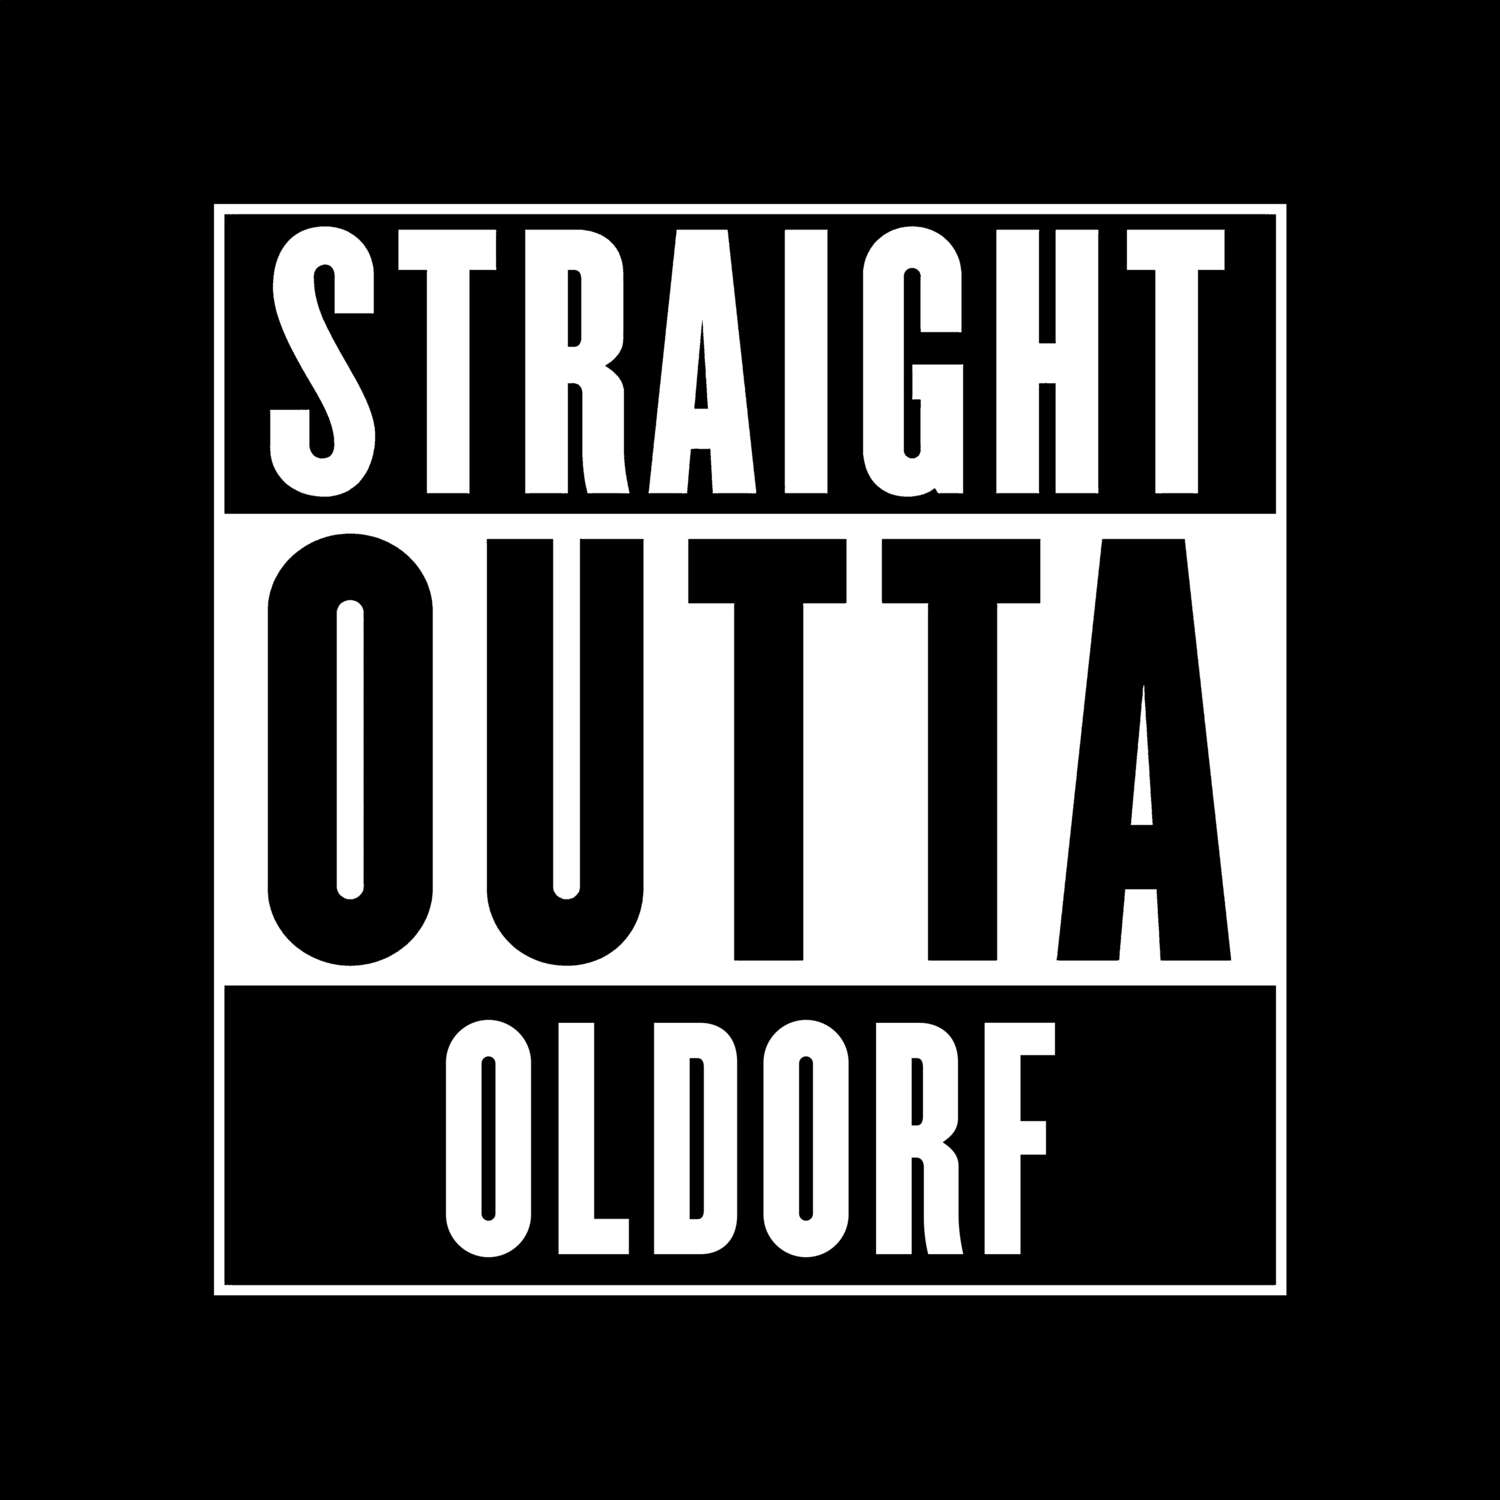 Oldorf T-Shirt »Straight Outta«